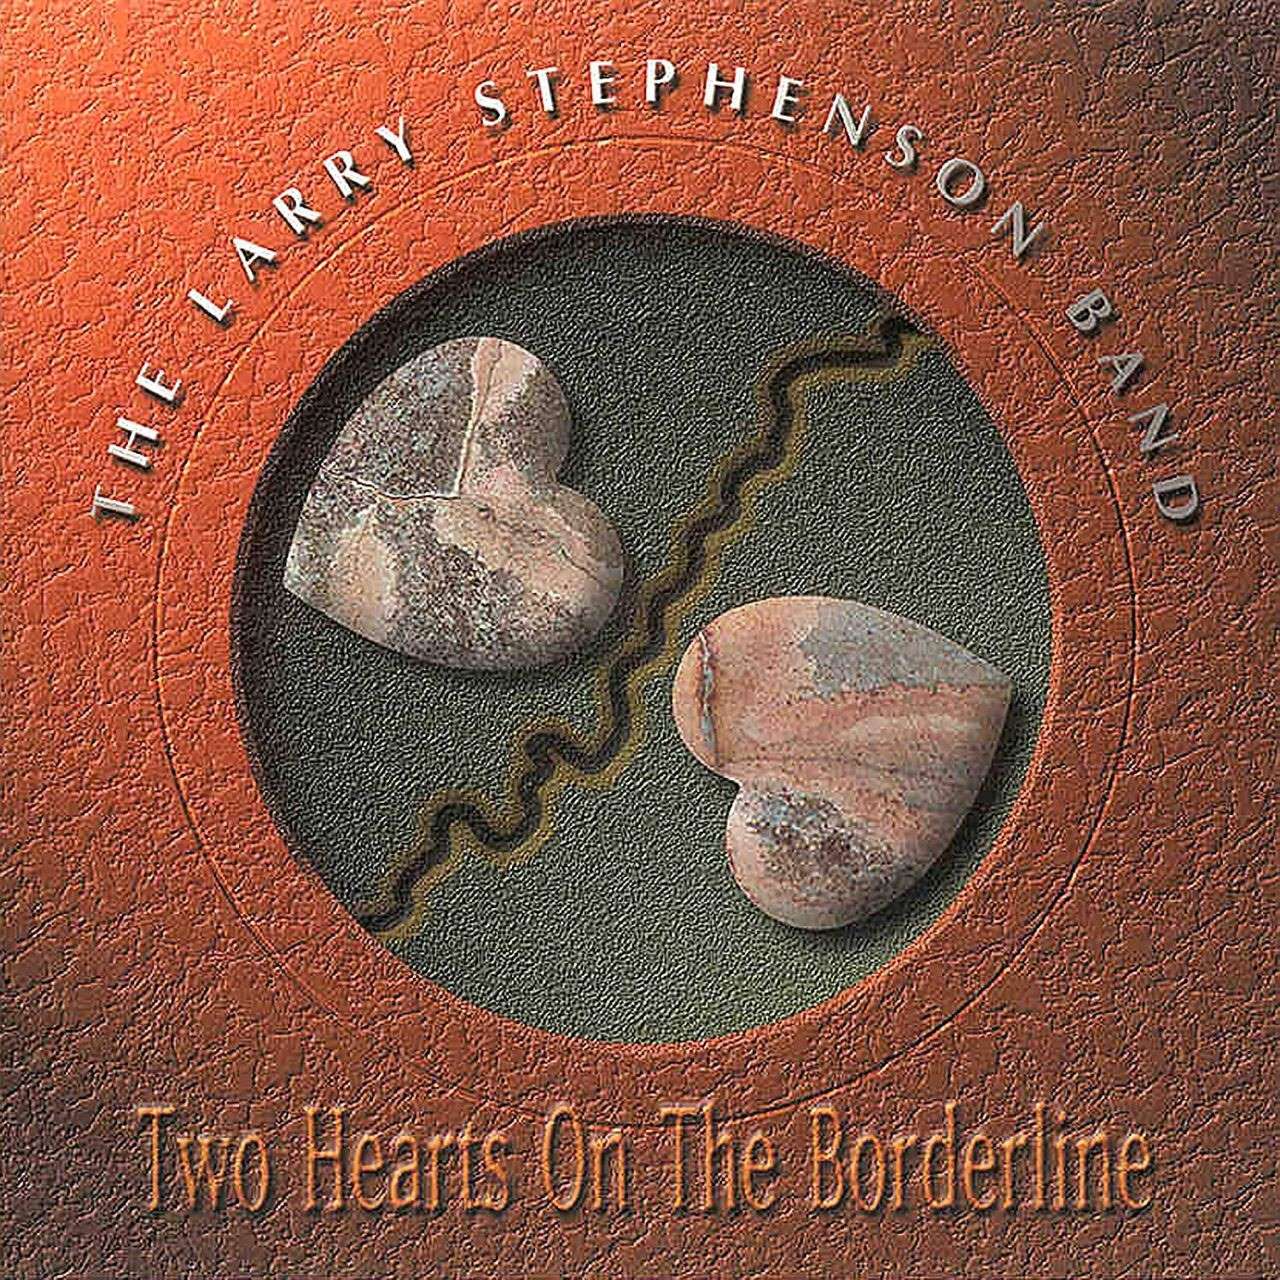 Larry Stephenson Band - Two Hearts On The Borderline cover album